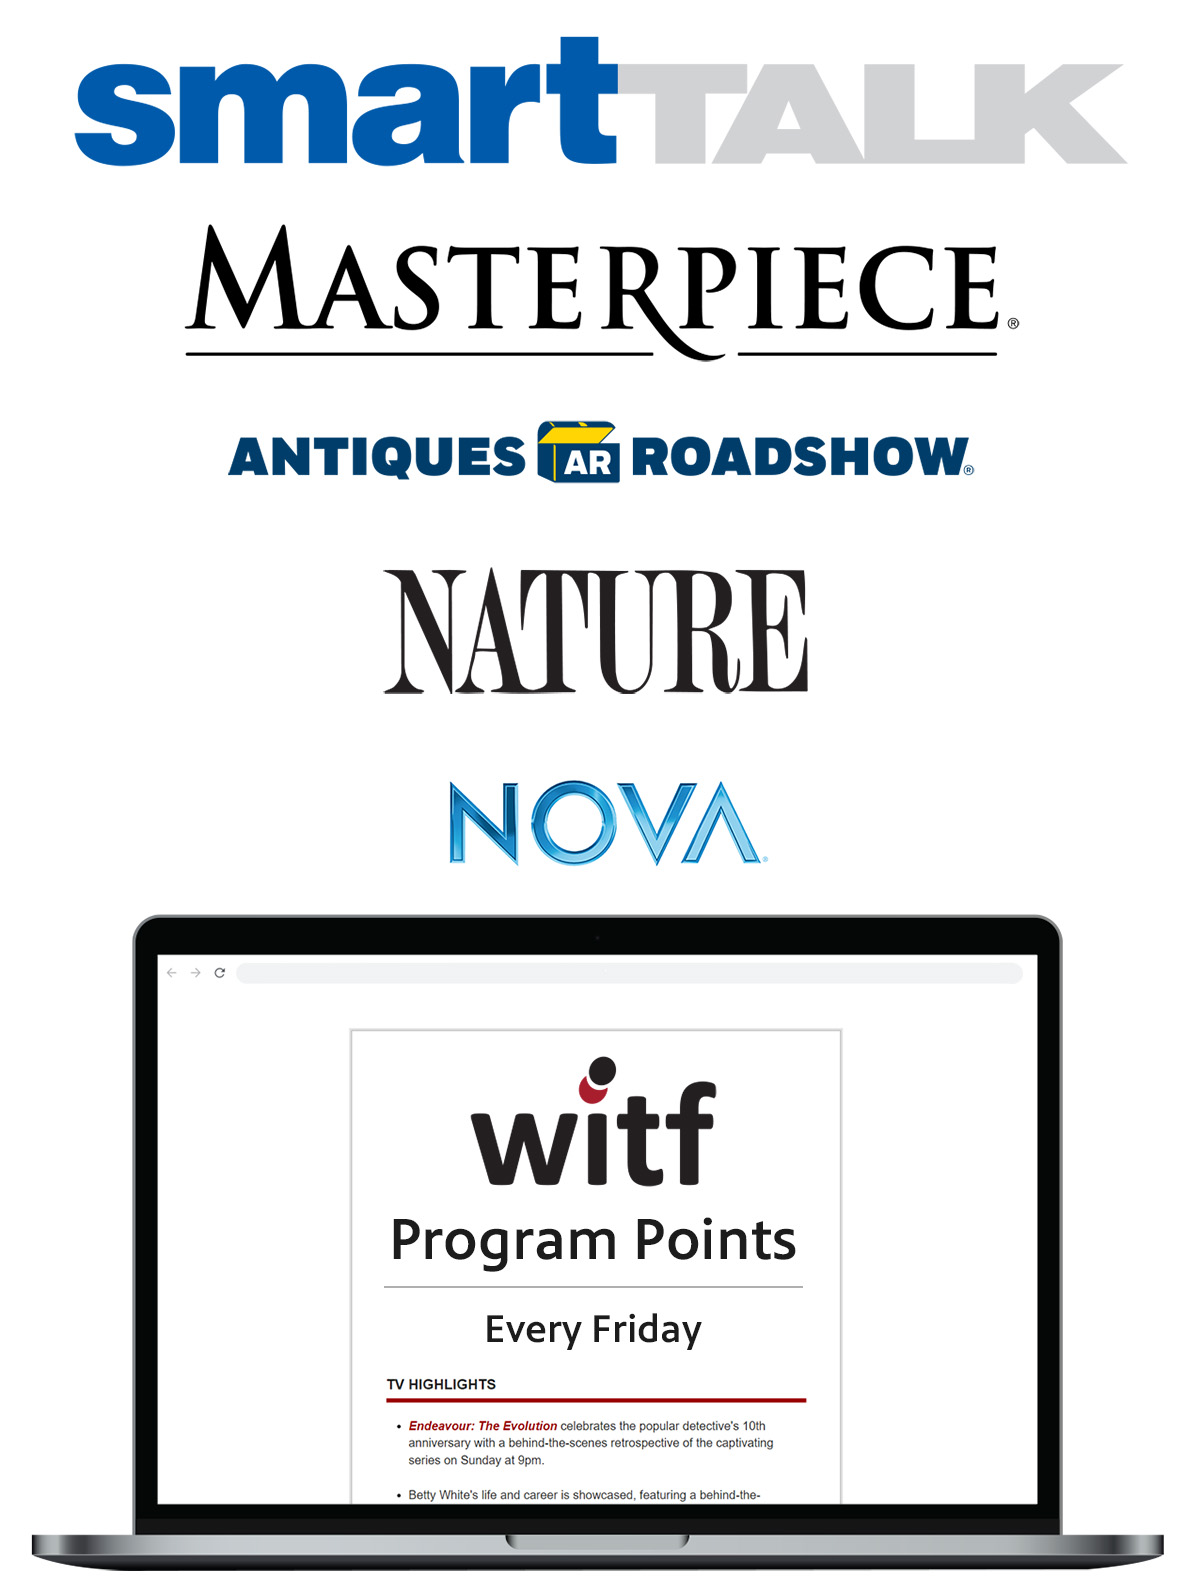 Get updates on WITF shows including Smart Talk MASTERPIECE Antiques Roadshow Nature and NOVA every week with Program Points